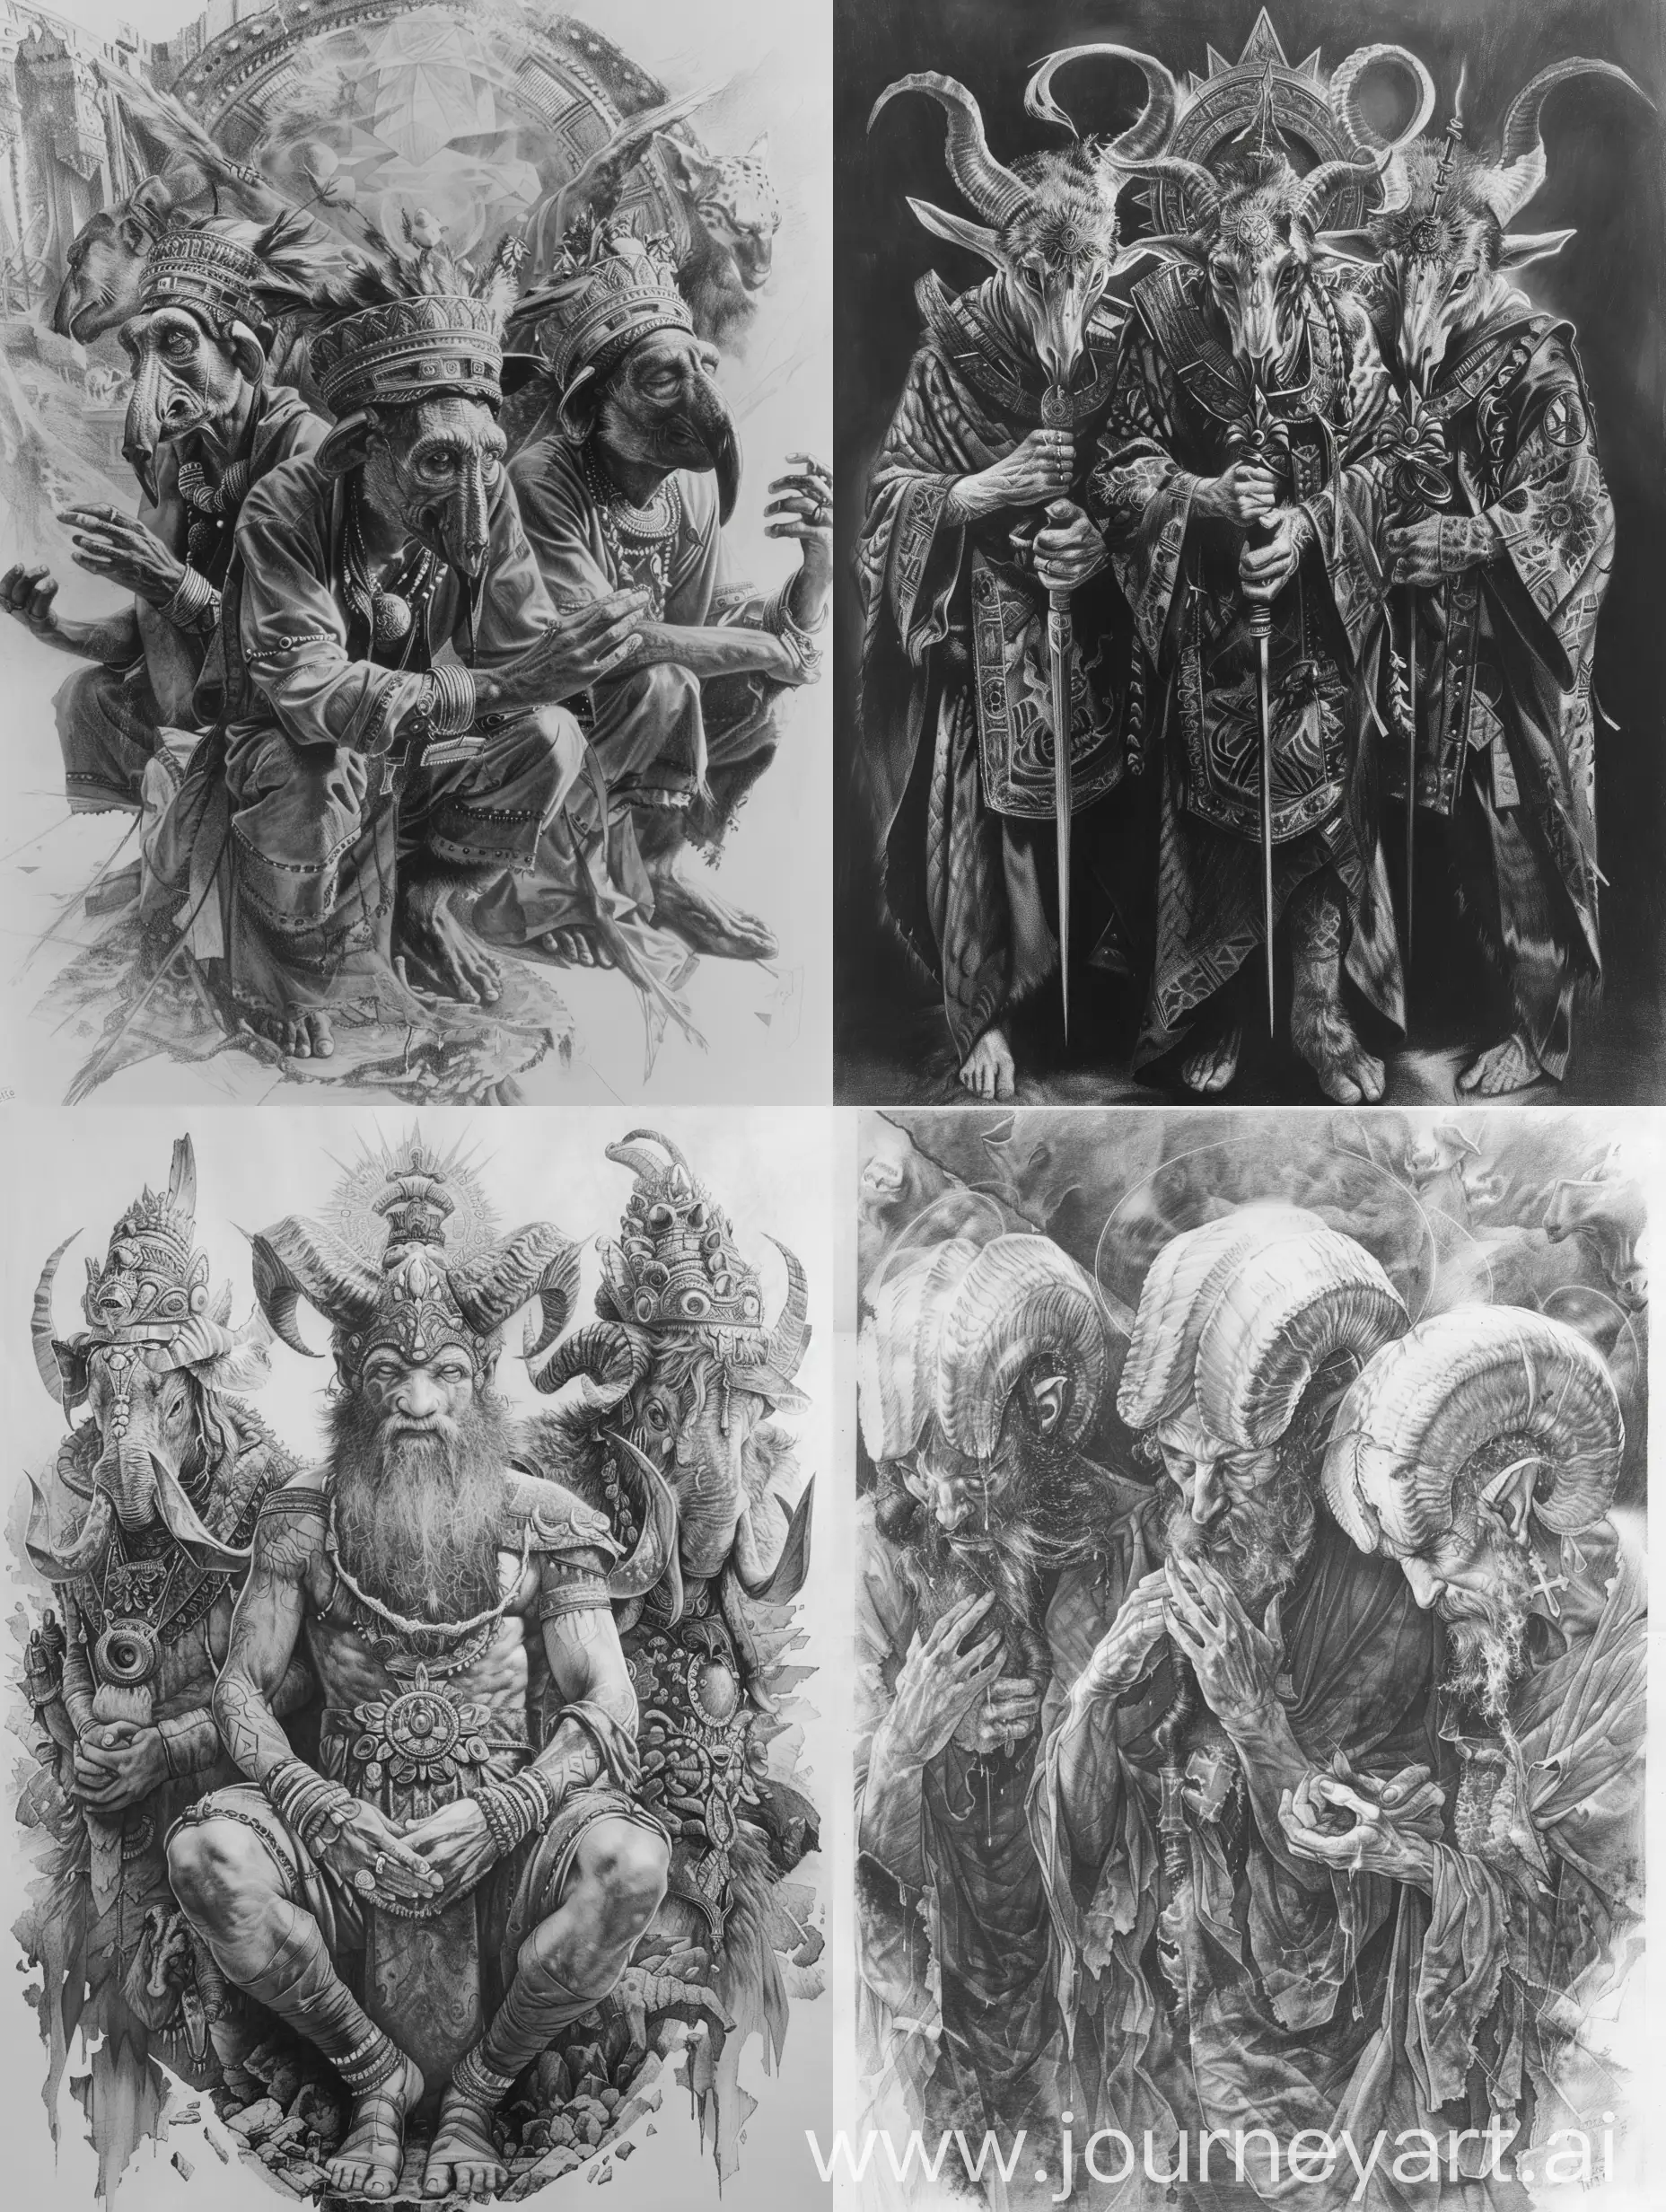 creative dark hyper realistic pencil sketch of three mythological figures with animal heads, each showing reverence towards the central figure in a surreal setting on a large canvas in great details